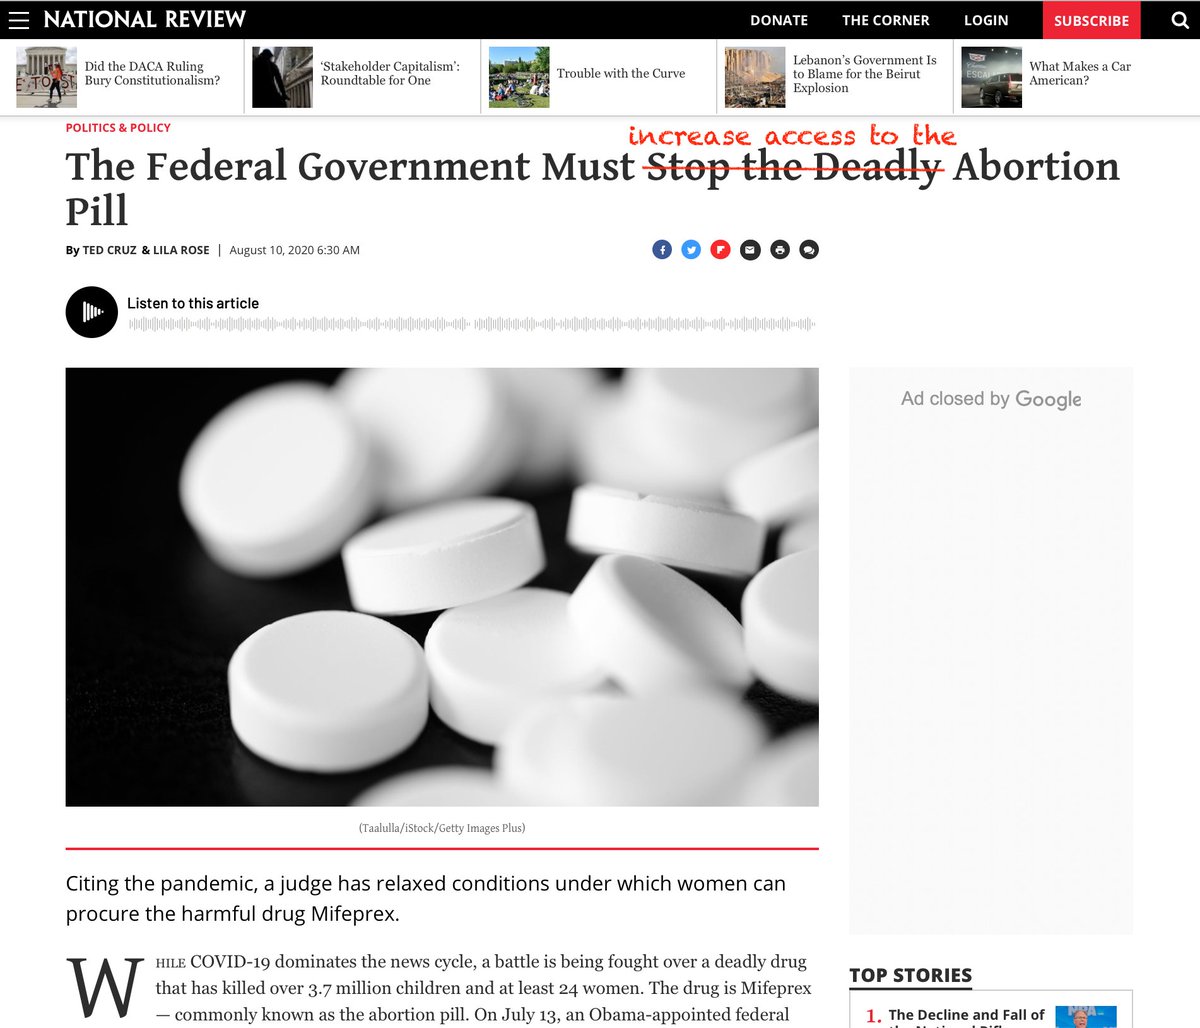 Hi  @tedcruz &  @LilaGraceRose. I saw your latest op-ed on the court's decision to make medication abortions more accessible in a few states during the coronavirus pandemic.I hope you won't mind if I offer a few edits and fact check the piece. 